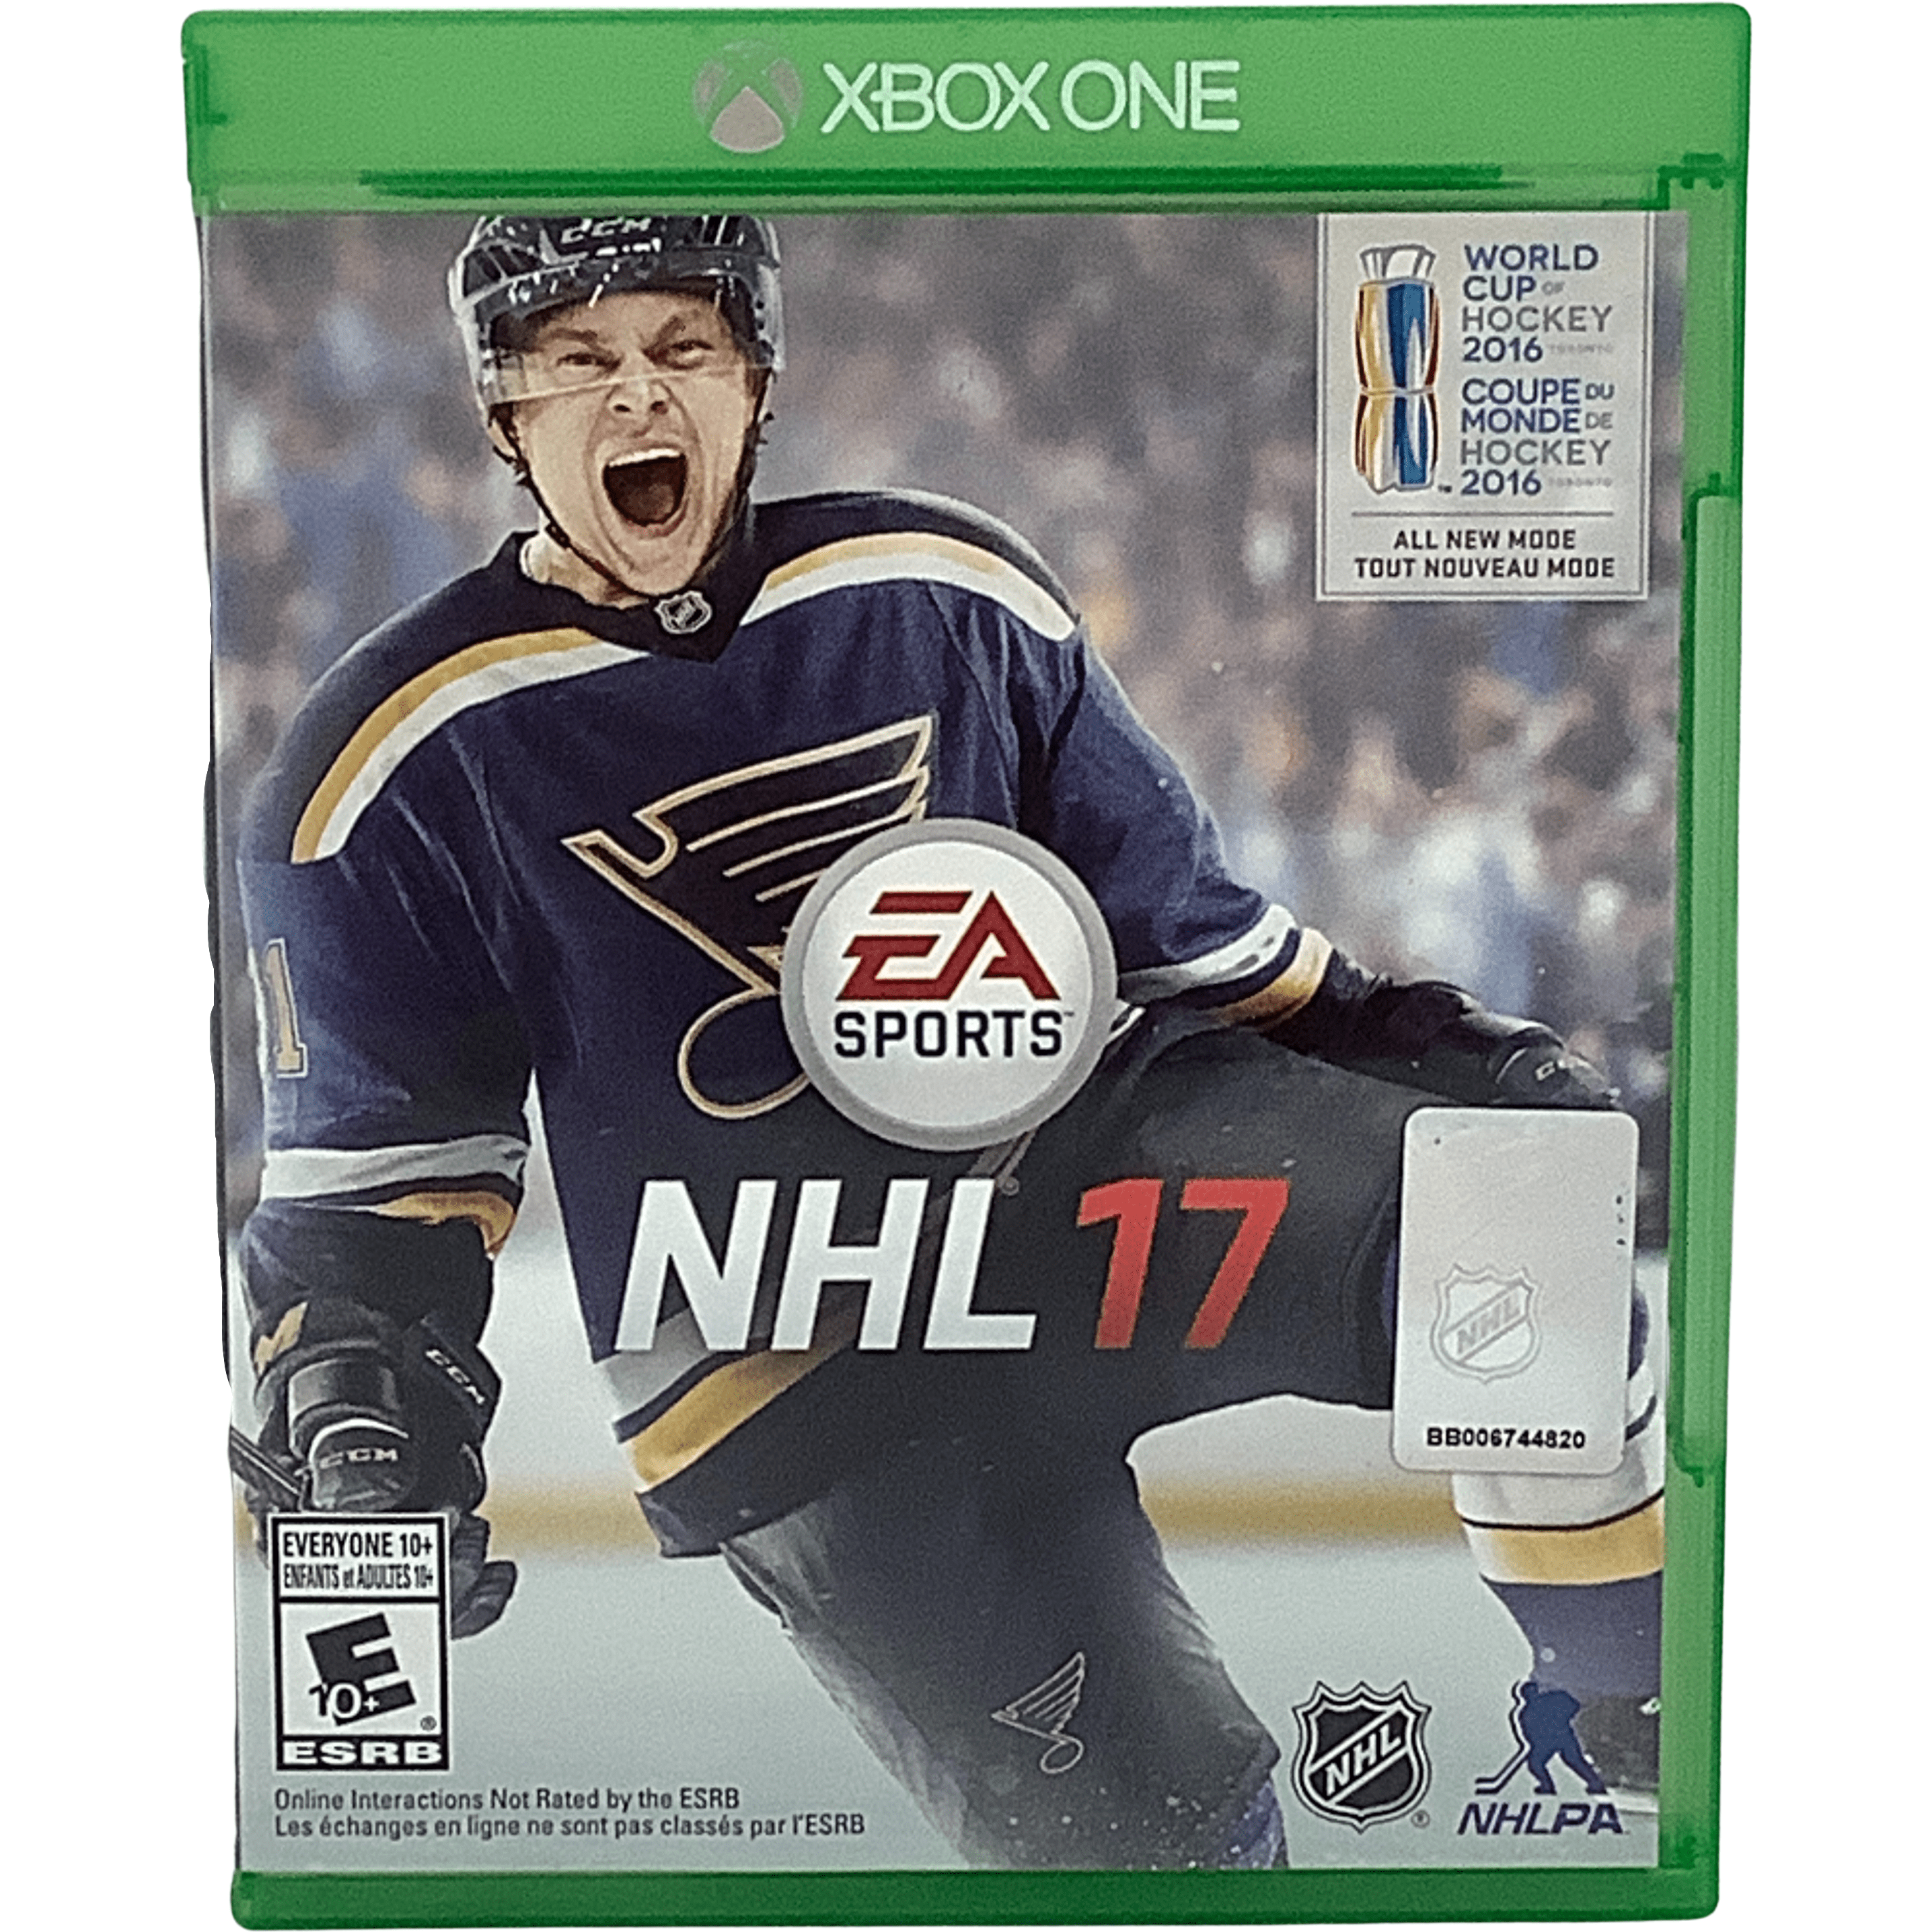 Xbox One / “NHL 17” Game / Video Game **OPENED*